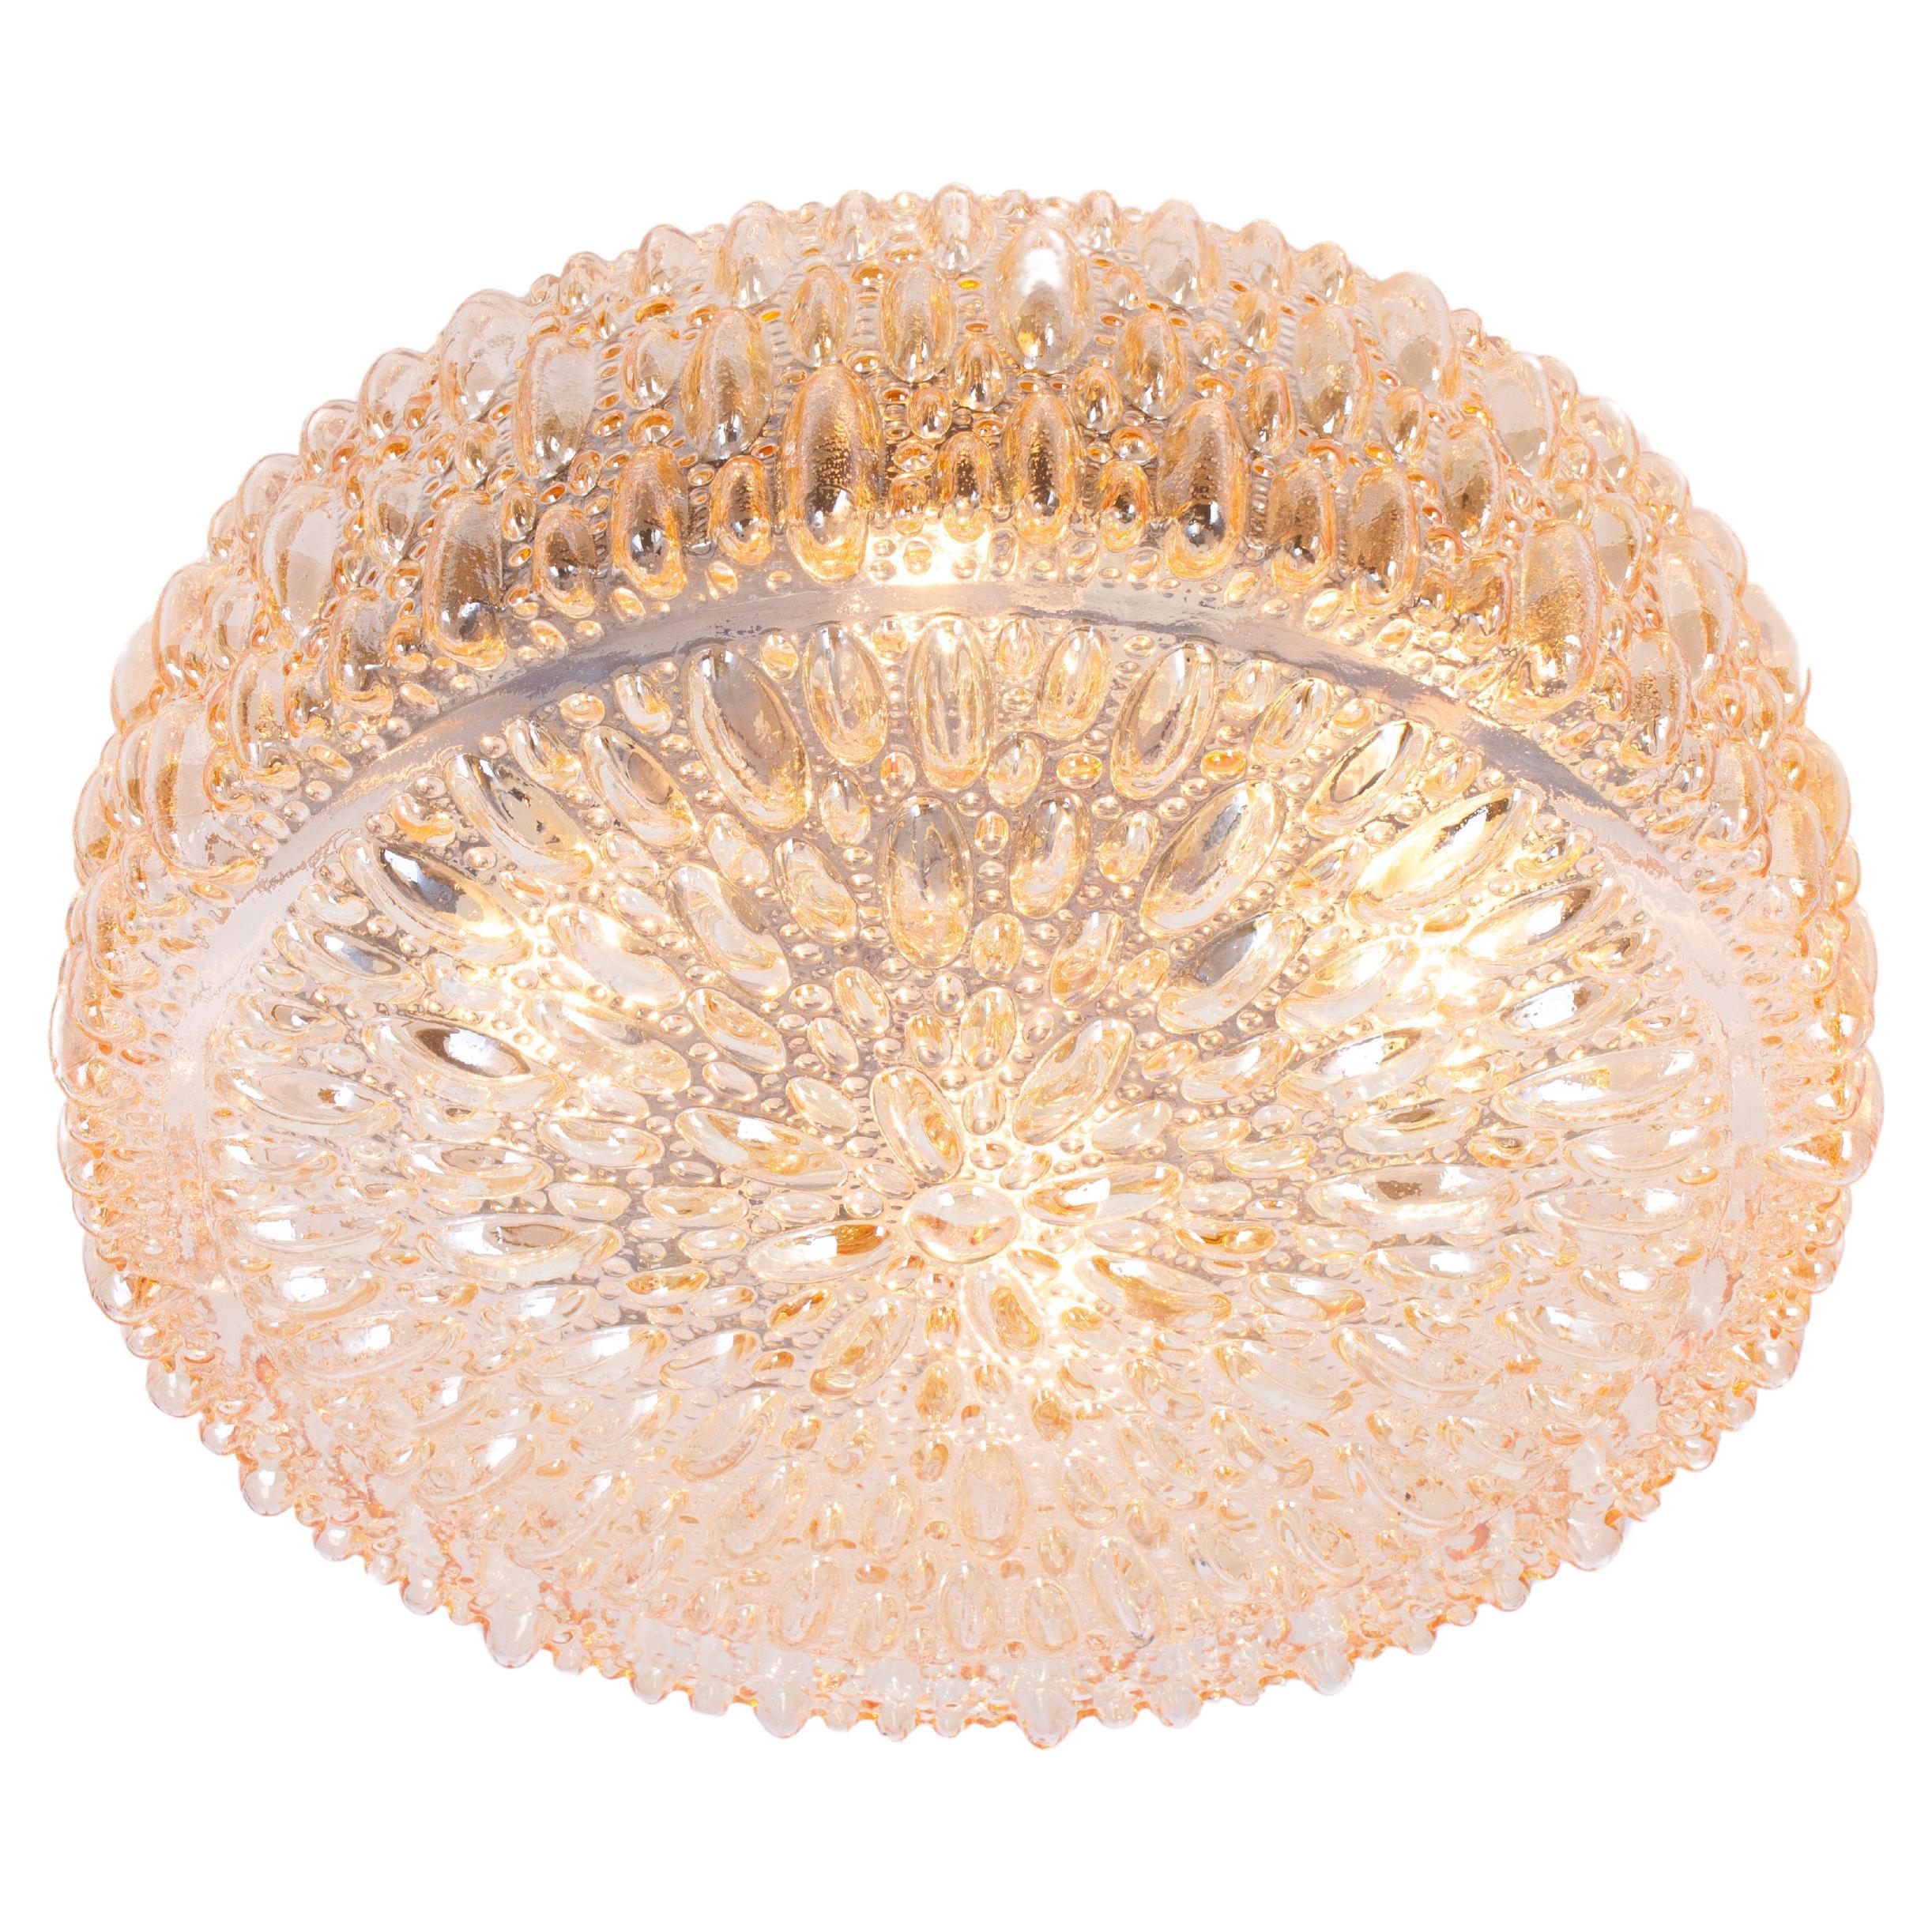 1 of 6 Large Round Textured Glass Flushmount by Limburg, Germany, 1970s For Sale